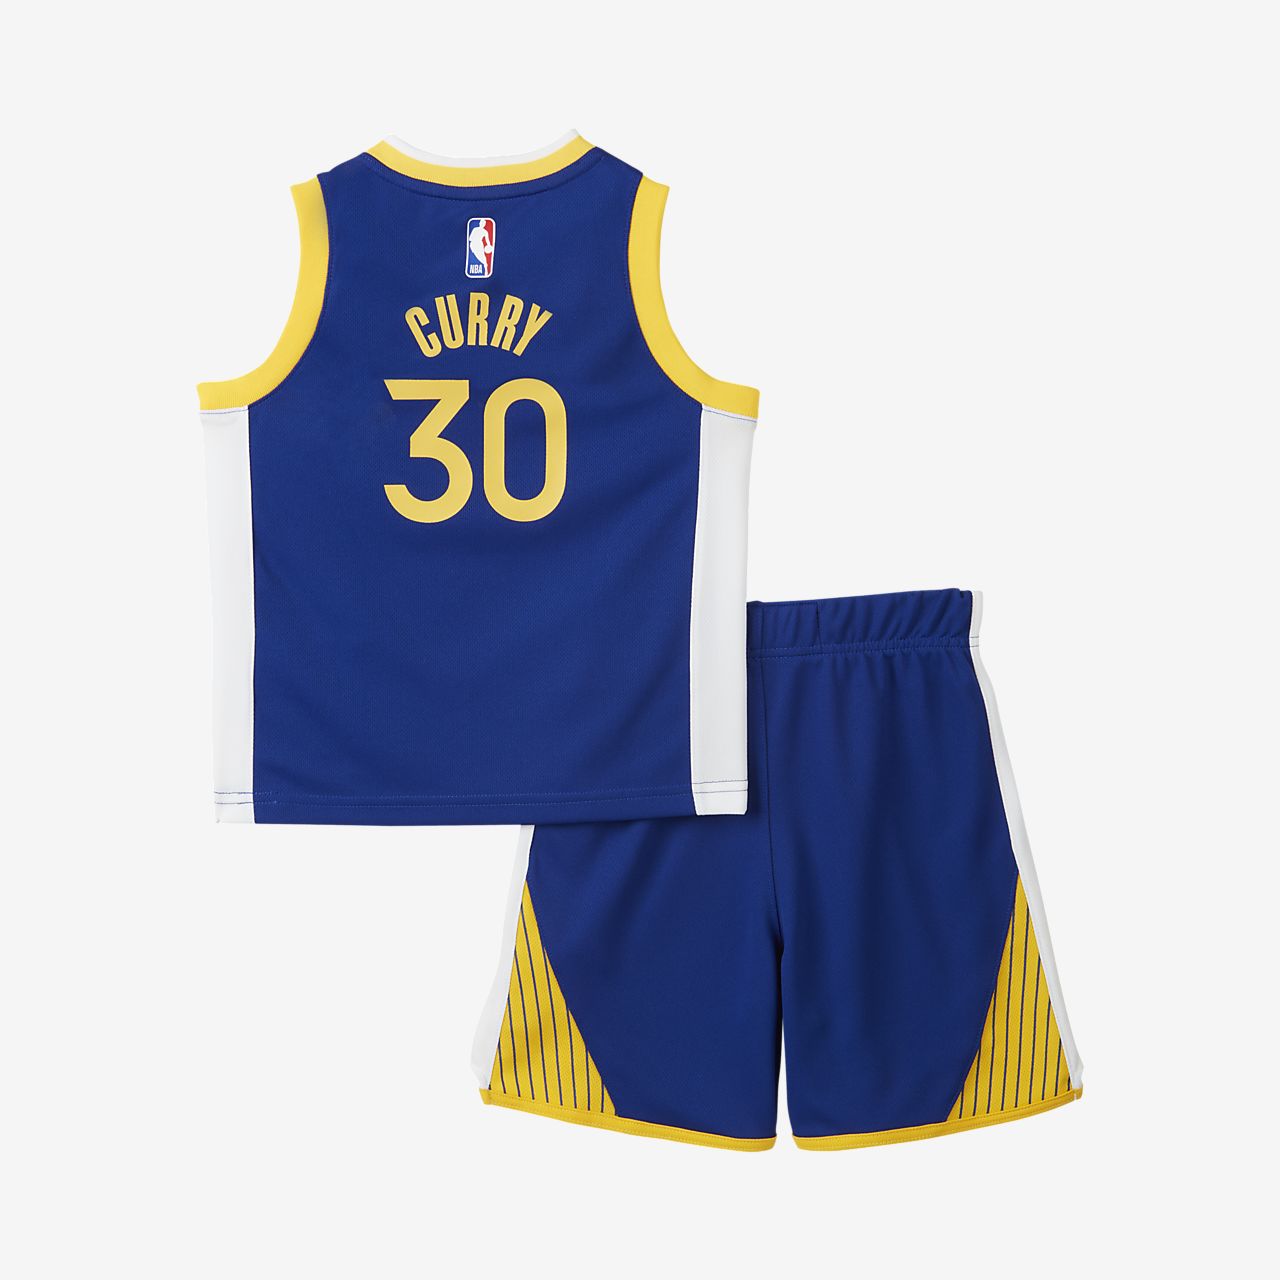 curry jersey and shorts